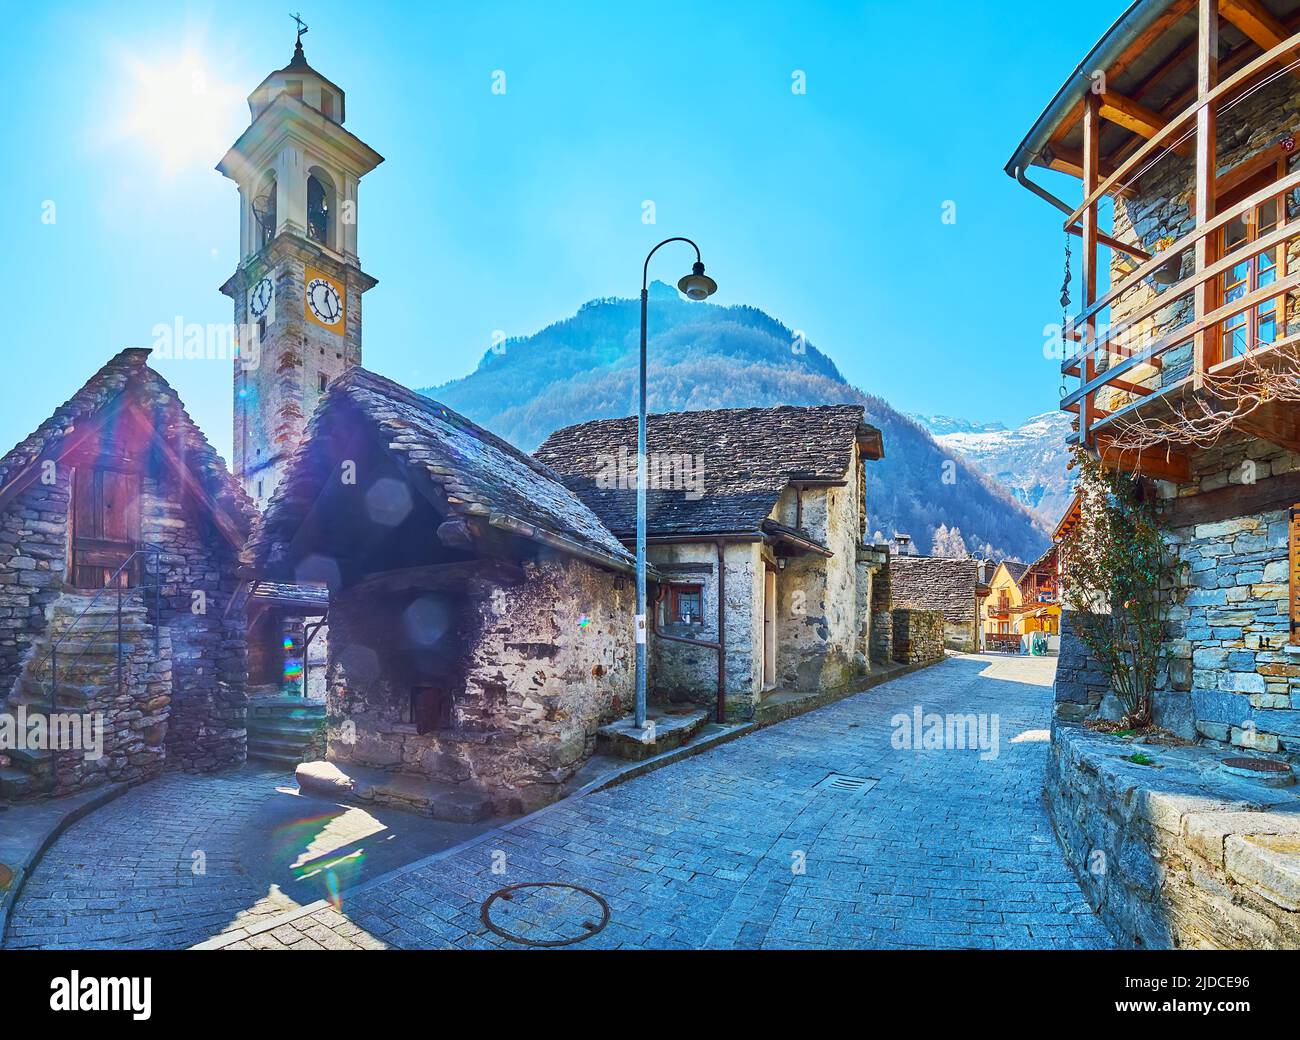 Panorama of sunny street with church's clocktower, stone houses and mountains, Sonogno village, Valle Verzasca, Switzerland Stock Photo